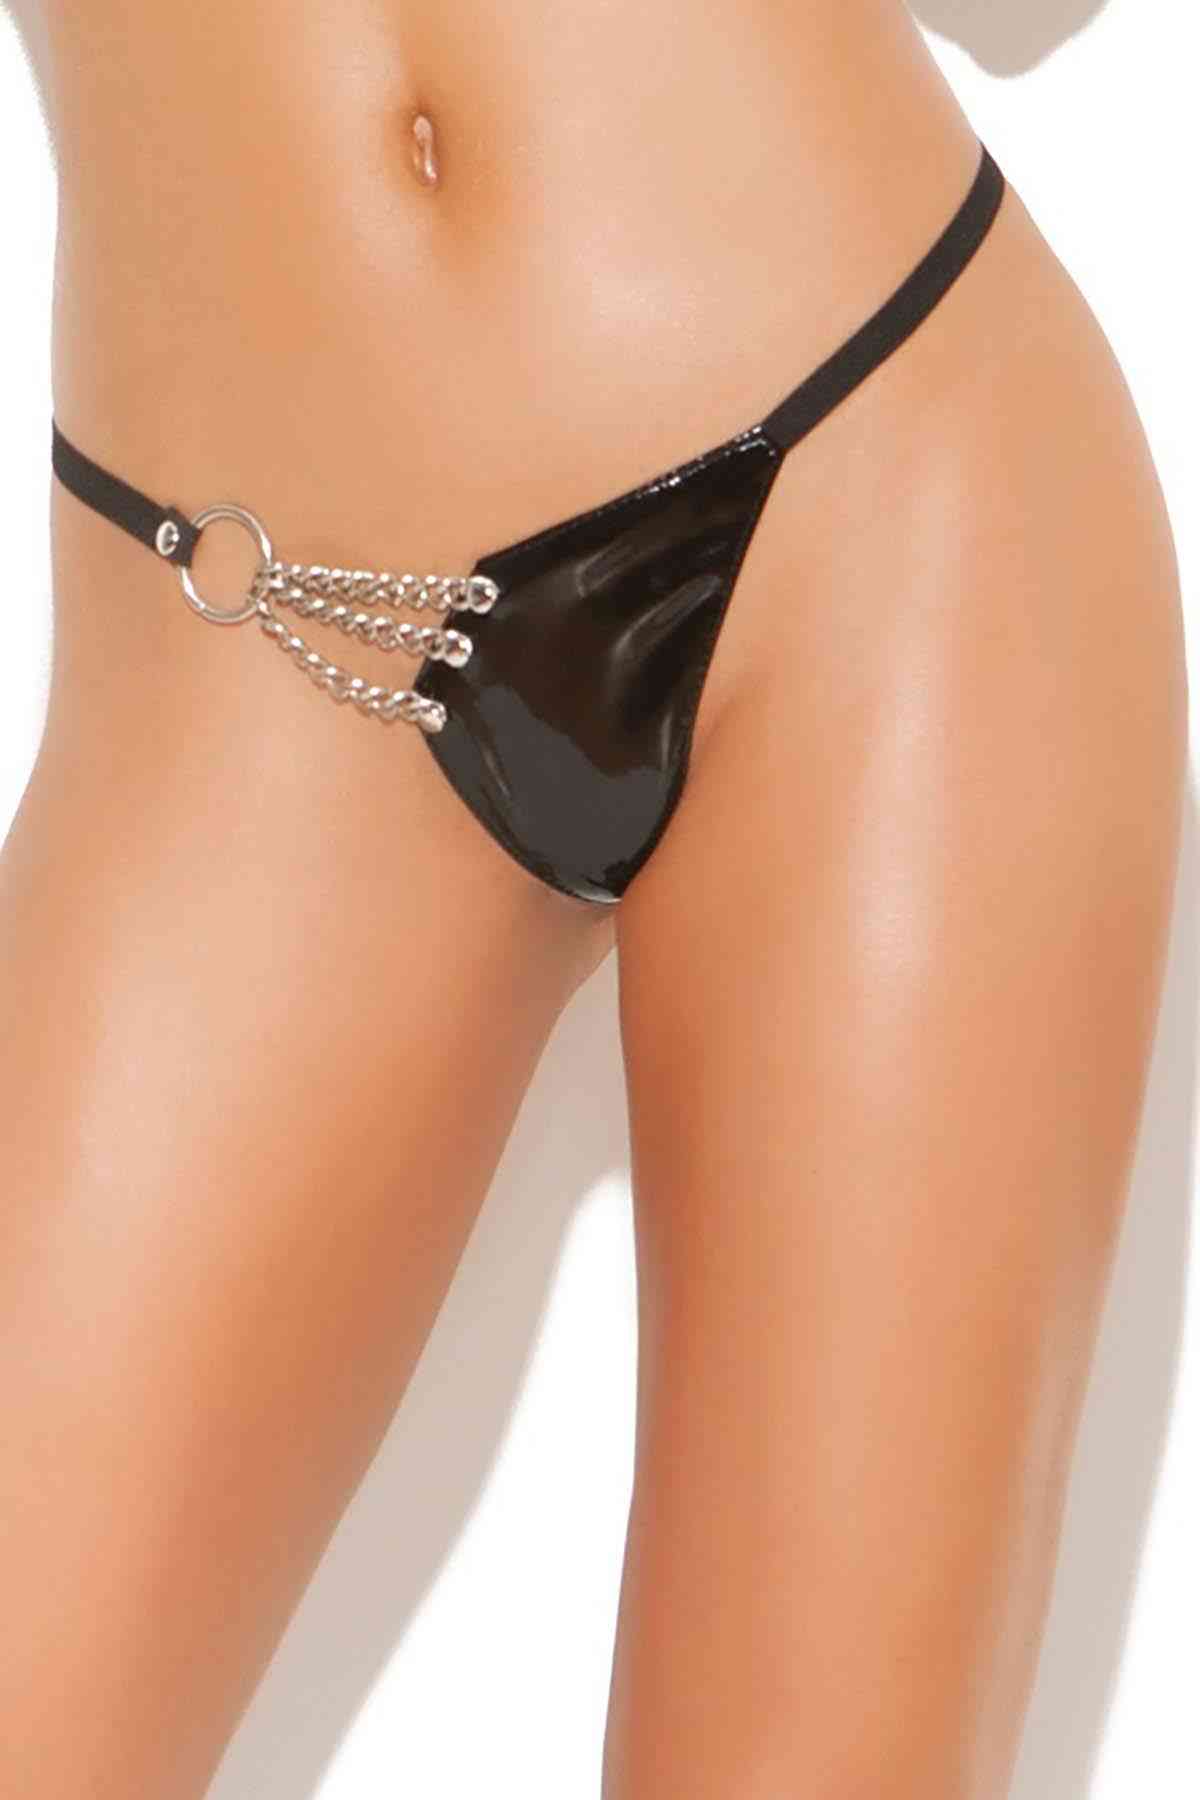 Leather Fantasy Thong Women Sexy Lingerie Exotic Panties